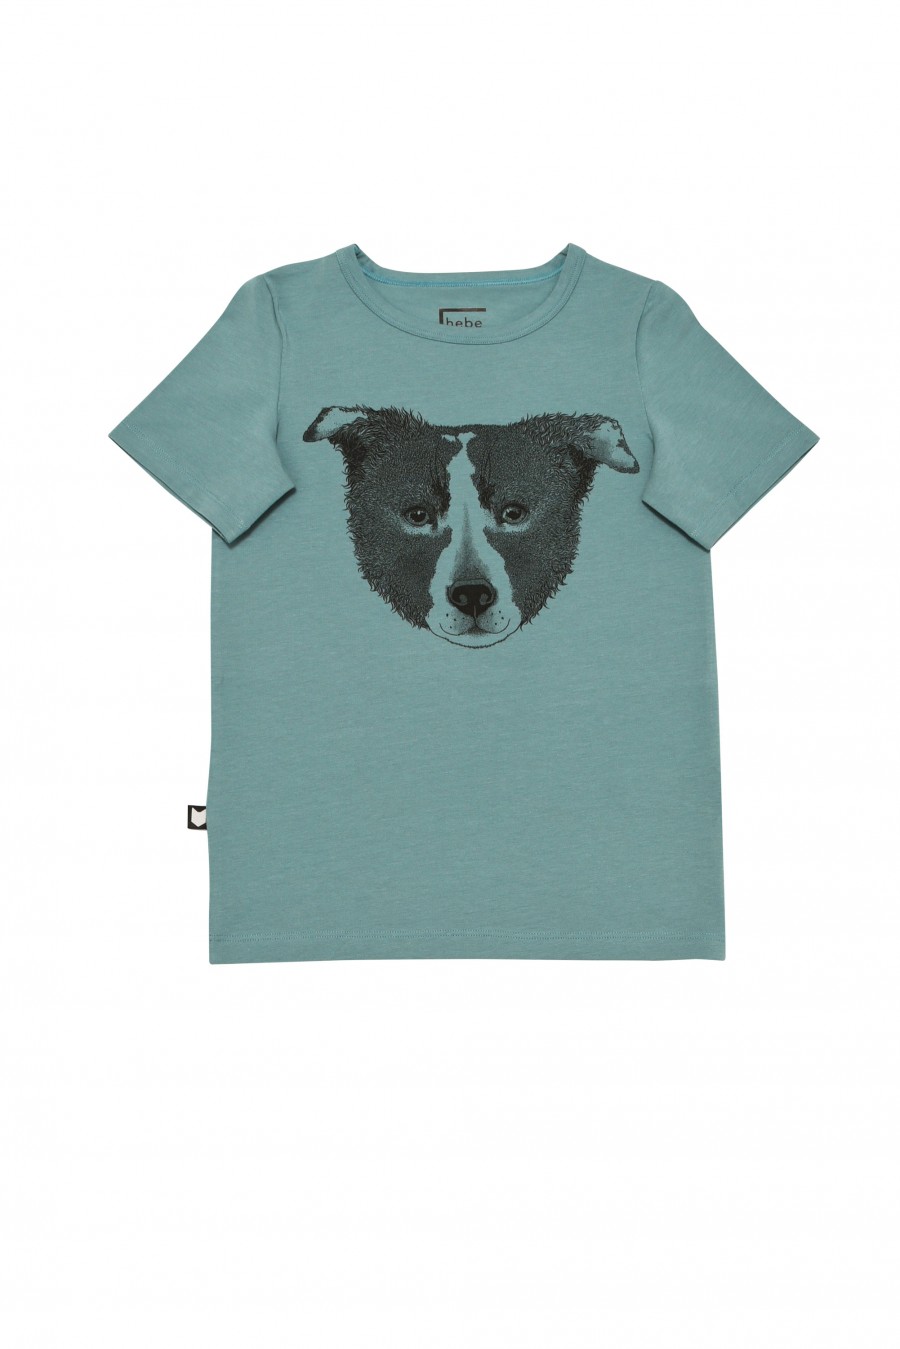 Top green with dog FW18202